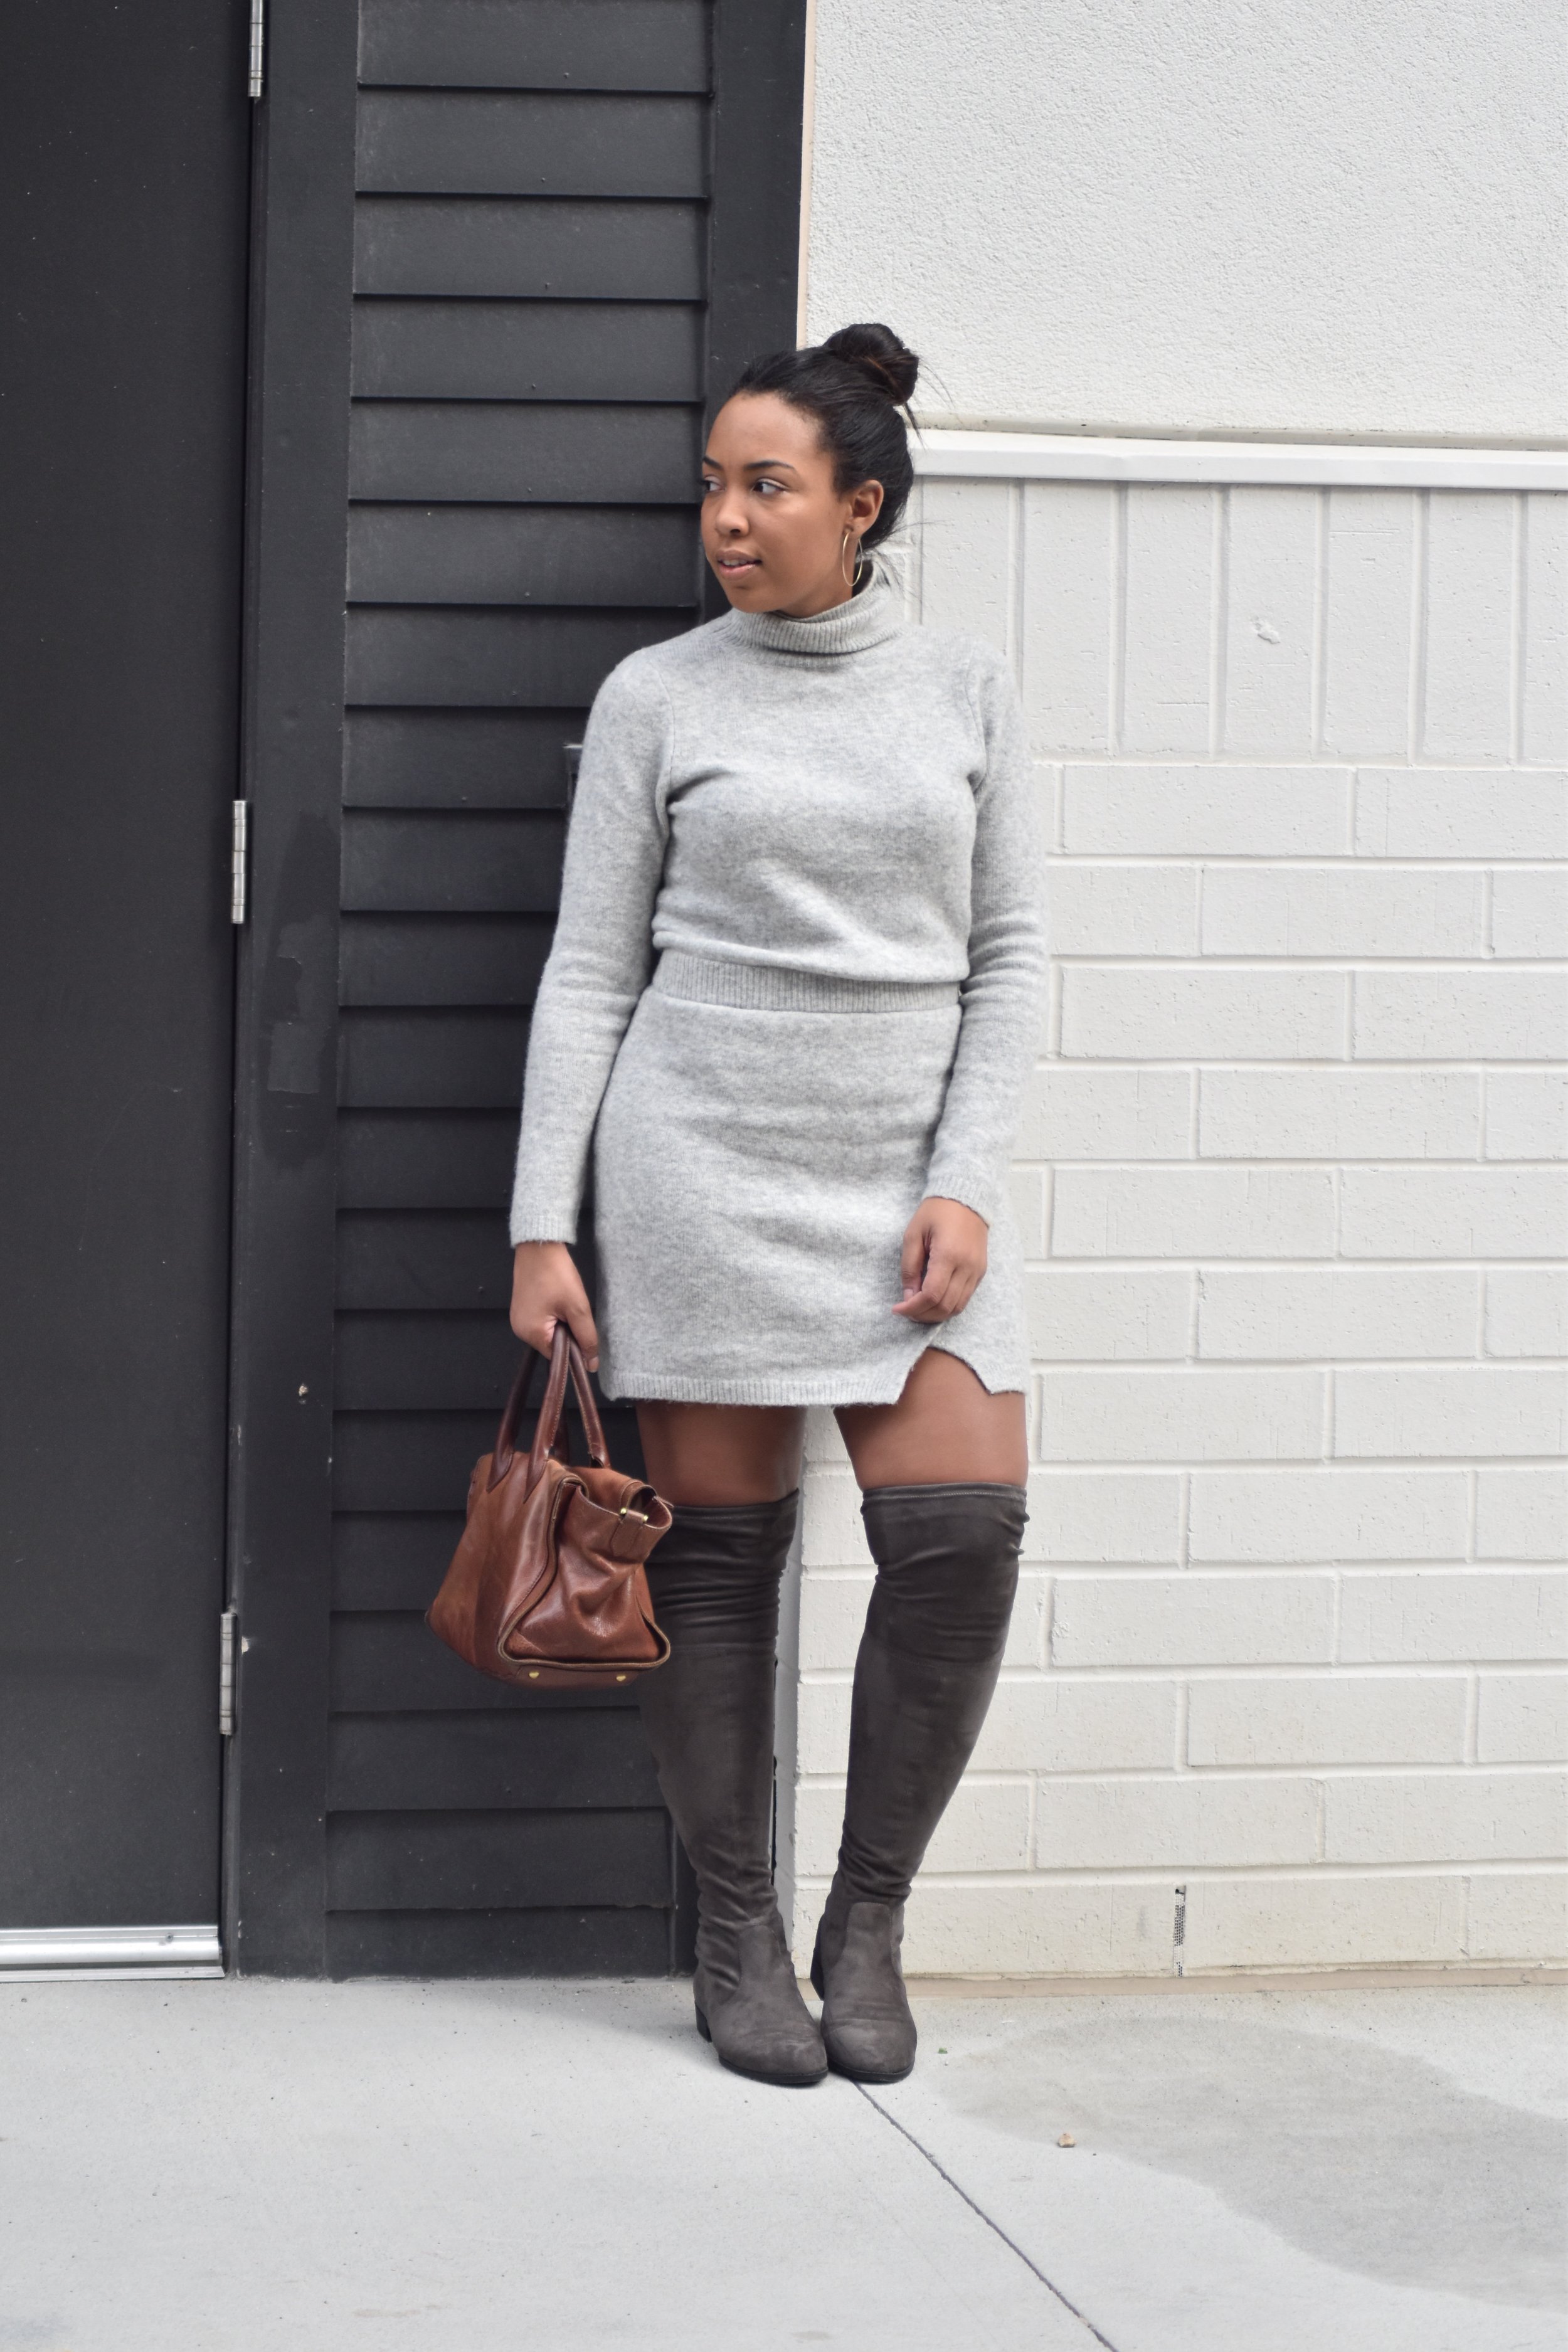 4-asos-sweater-dress-guess-factory-simplee-over-the-knee-boots-stuart-weitzman-lowland-boot-dupe-gray-fall-womens-fashion.JPG